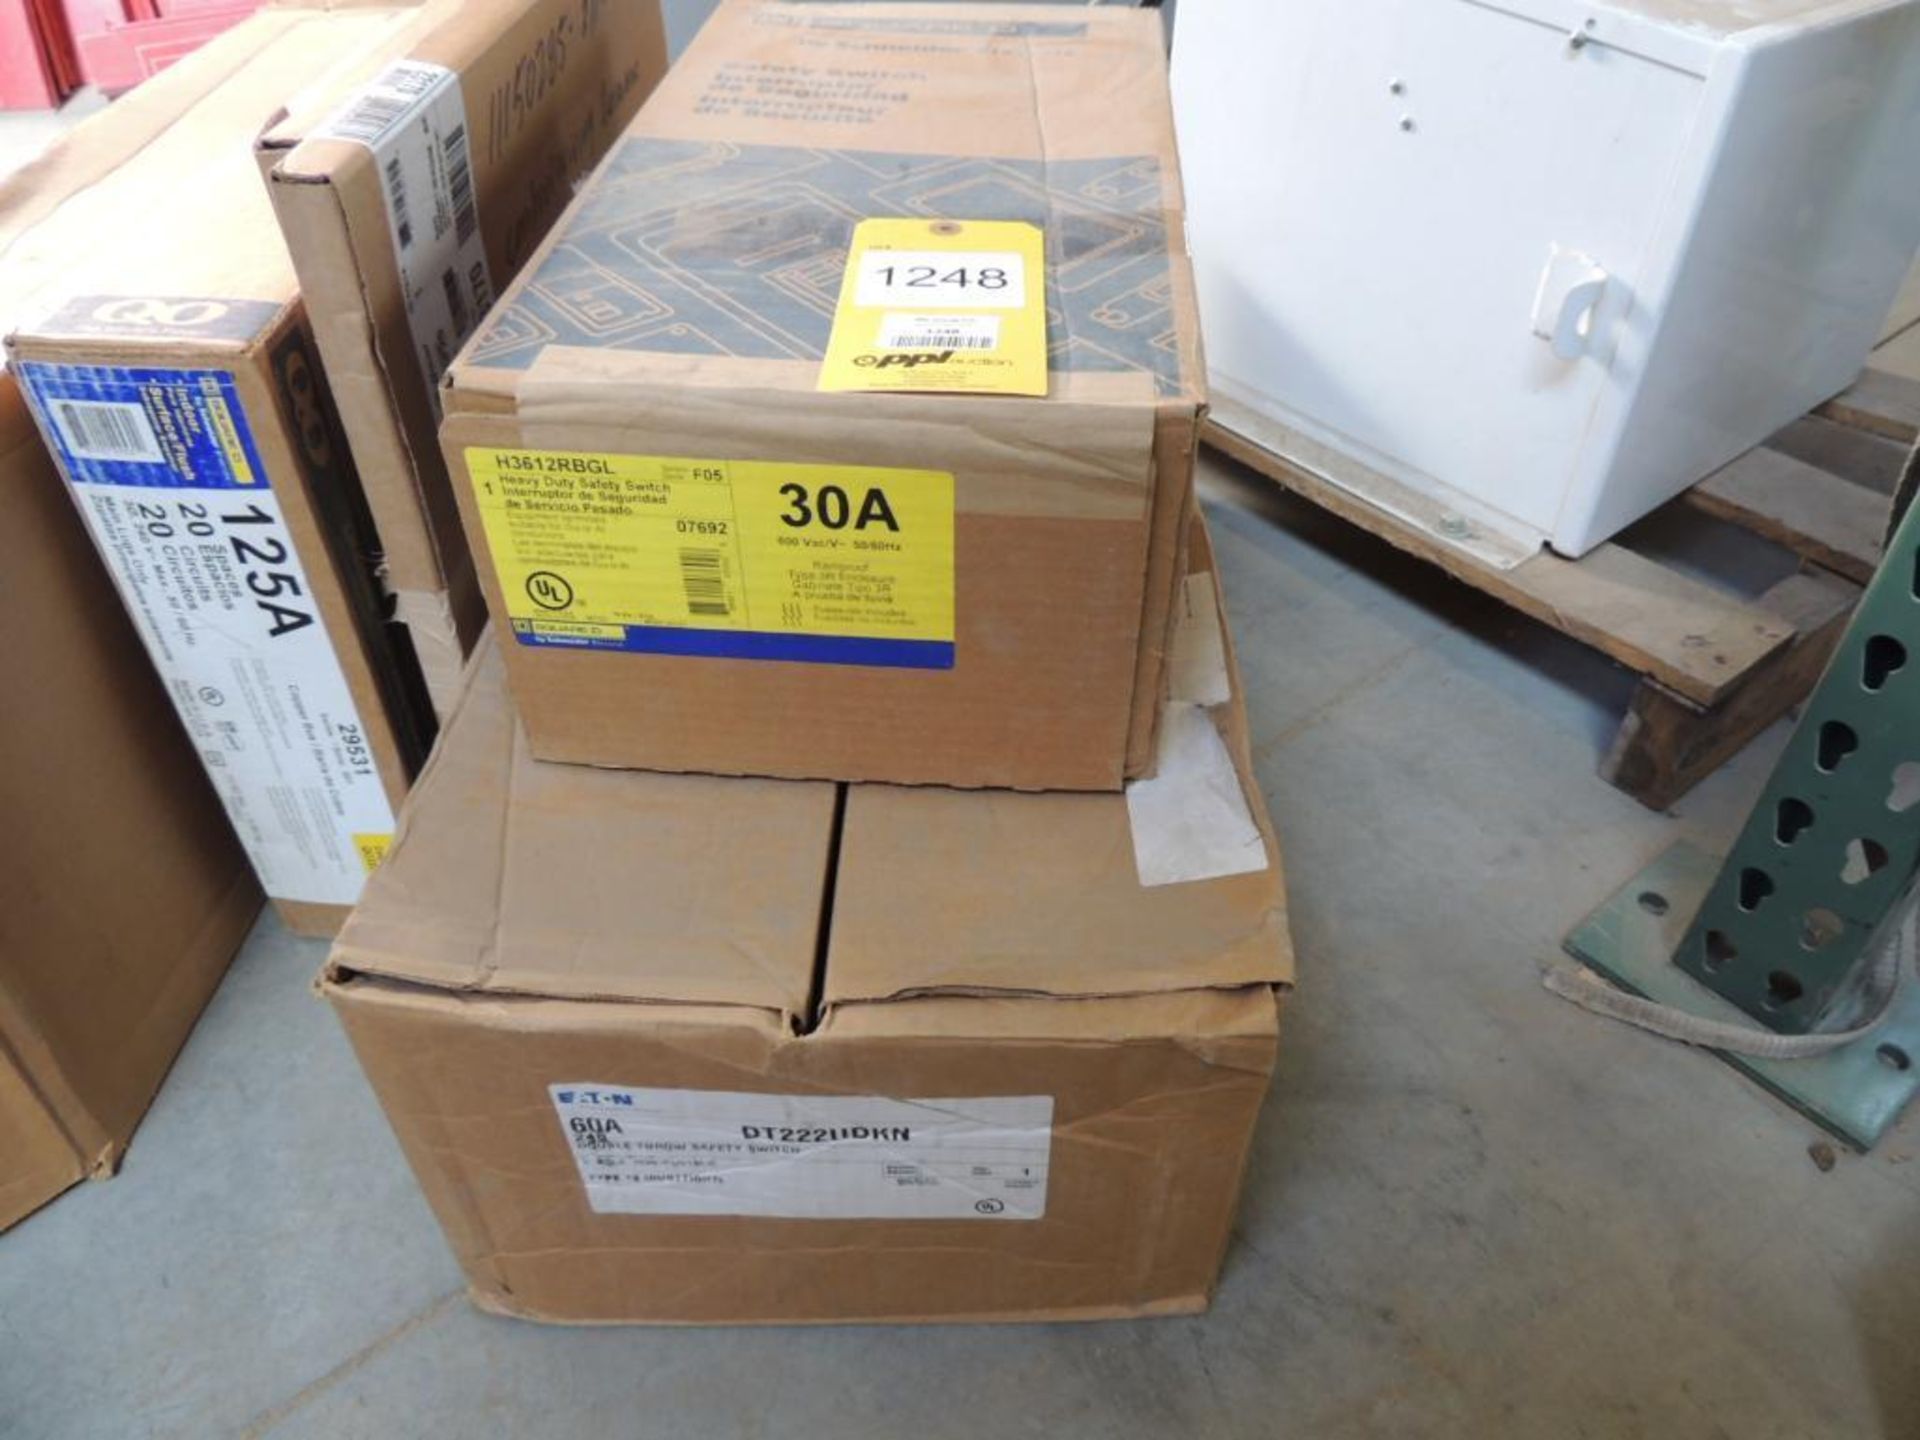 LOT: (1) Eaton Double Throw 60 AMP/ 240 Volt Safety Switch, (1) Square D Heavy Duty 30 AMP/ 600